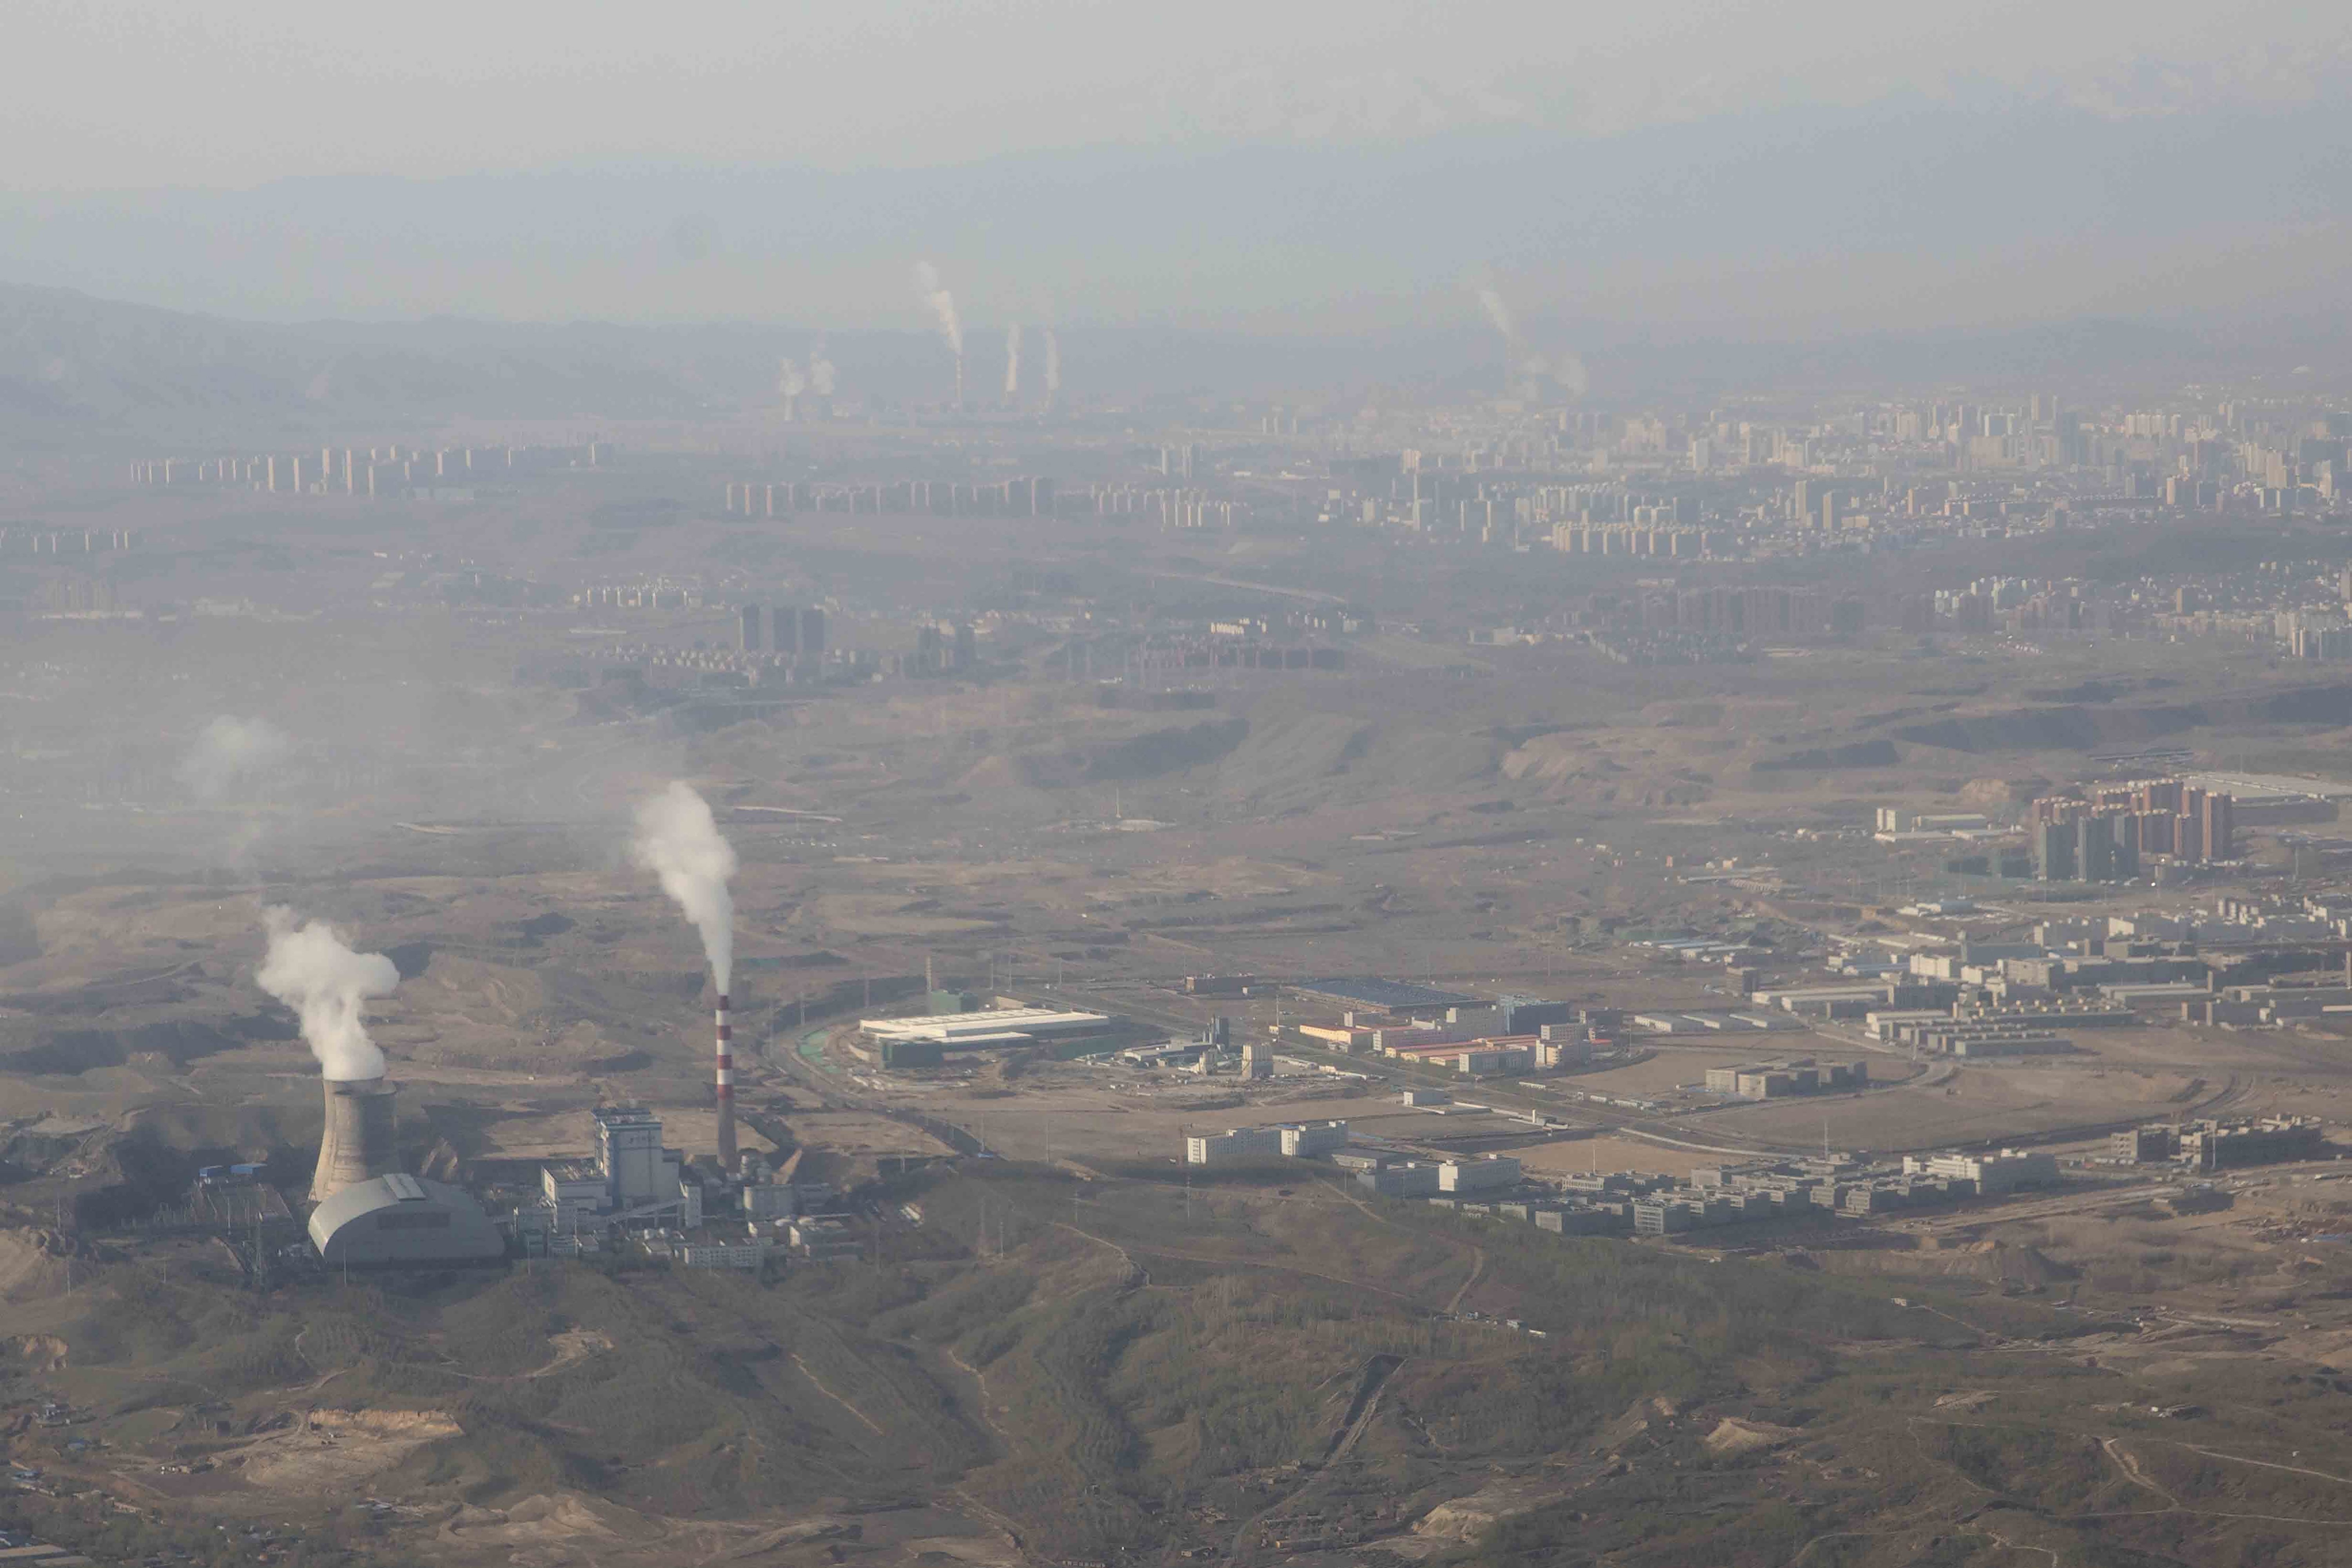 Smoke and steam rise from towers at the coal-fired Urumqi Thermal Power Plant as seen from a plane in Urumqi in western China&#039;s Xinjiang Uyghur Autonomous Region, April 21, 2021. (AP Photo)